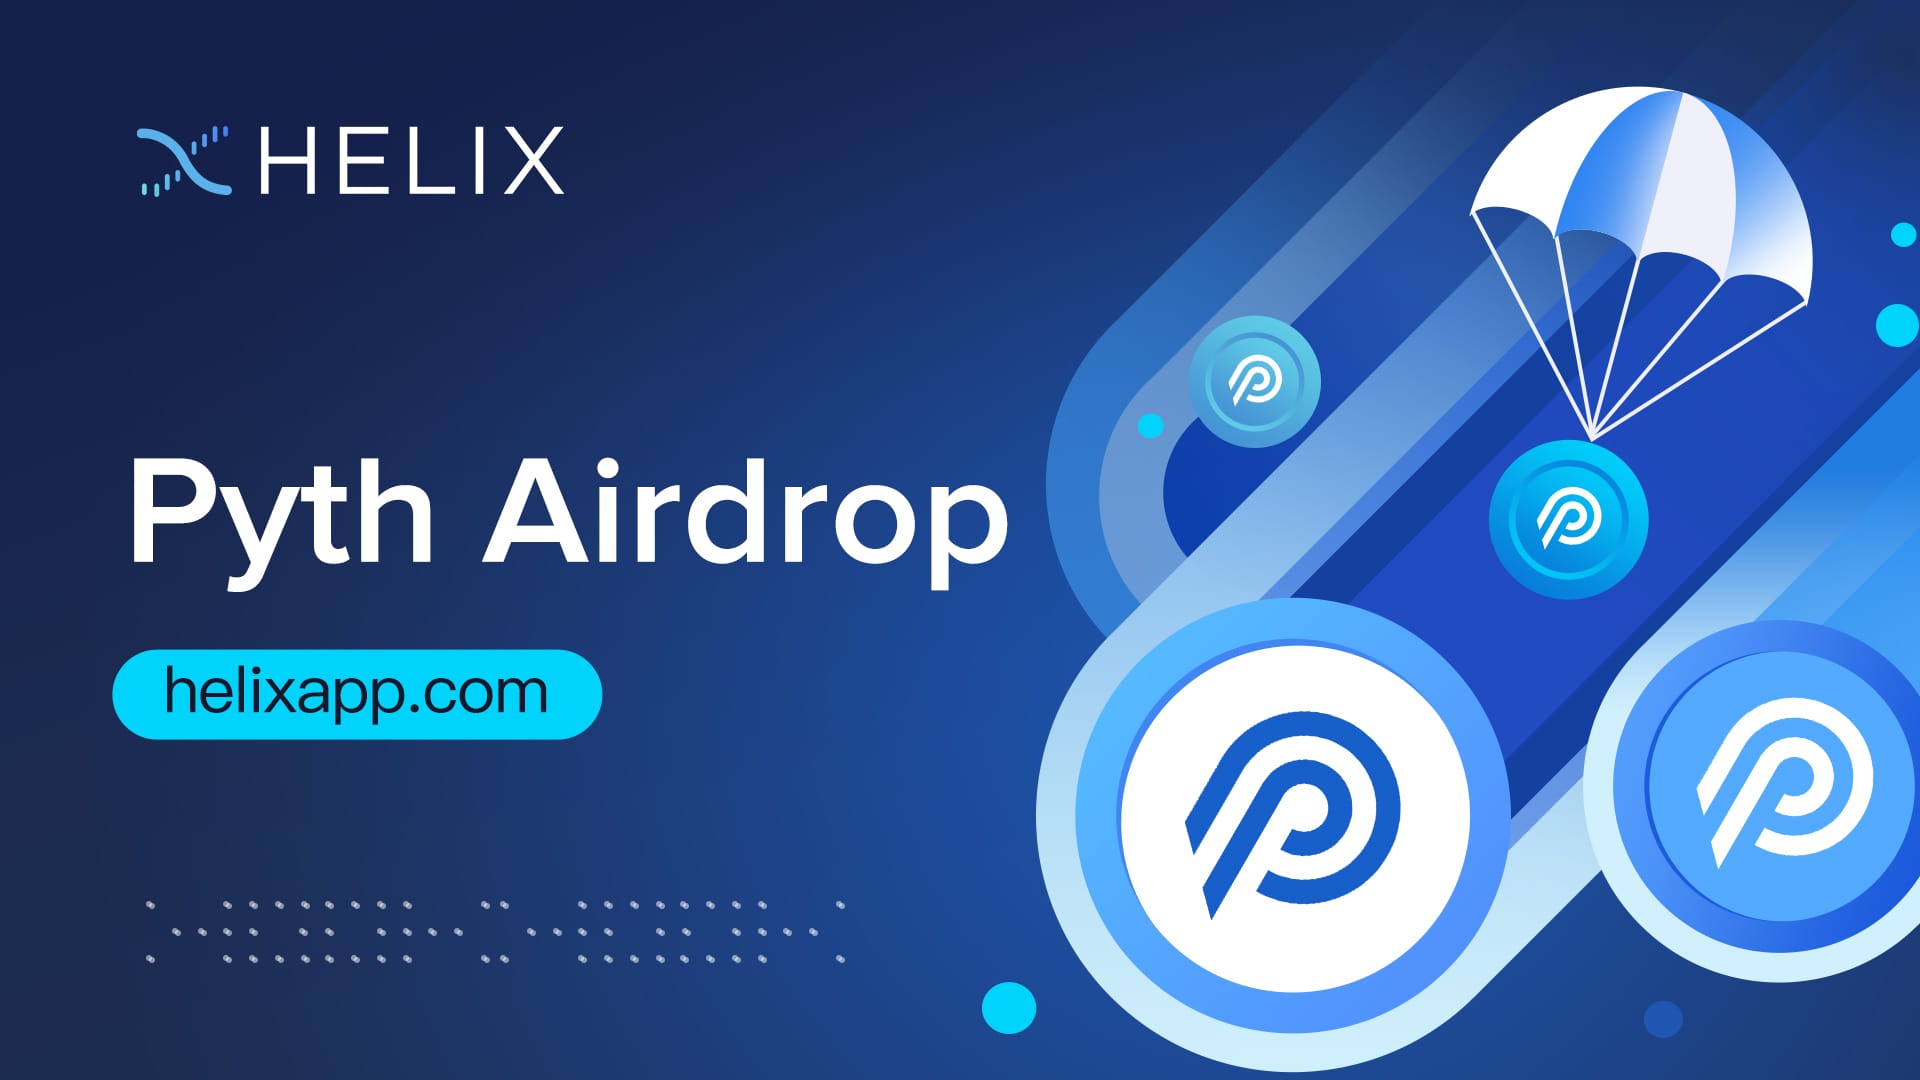 [CLOSED] Pyth Genesis Airdrop for Helix Users